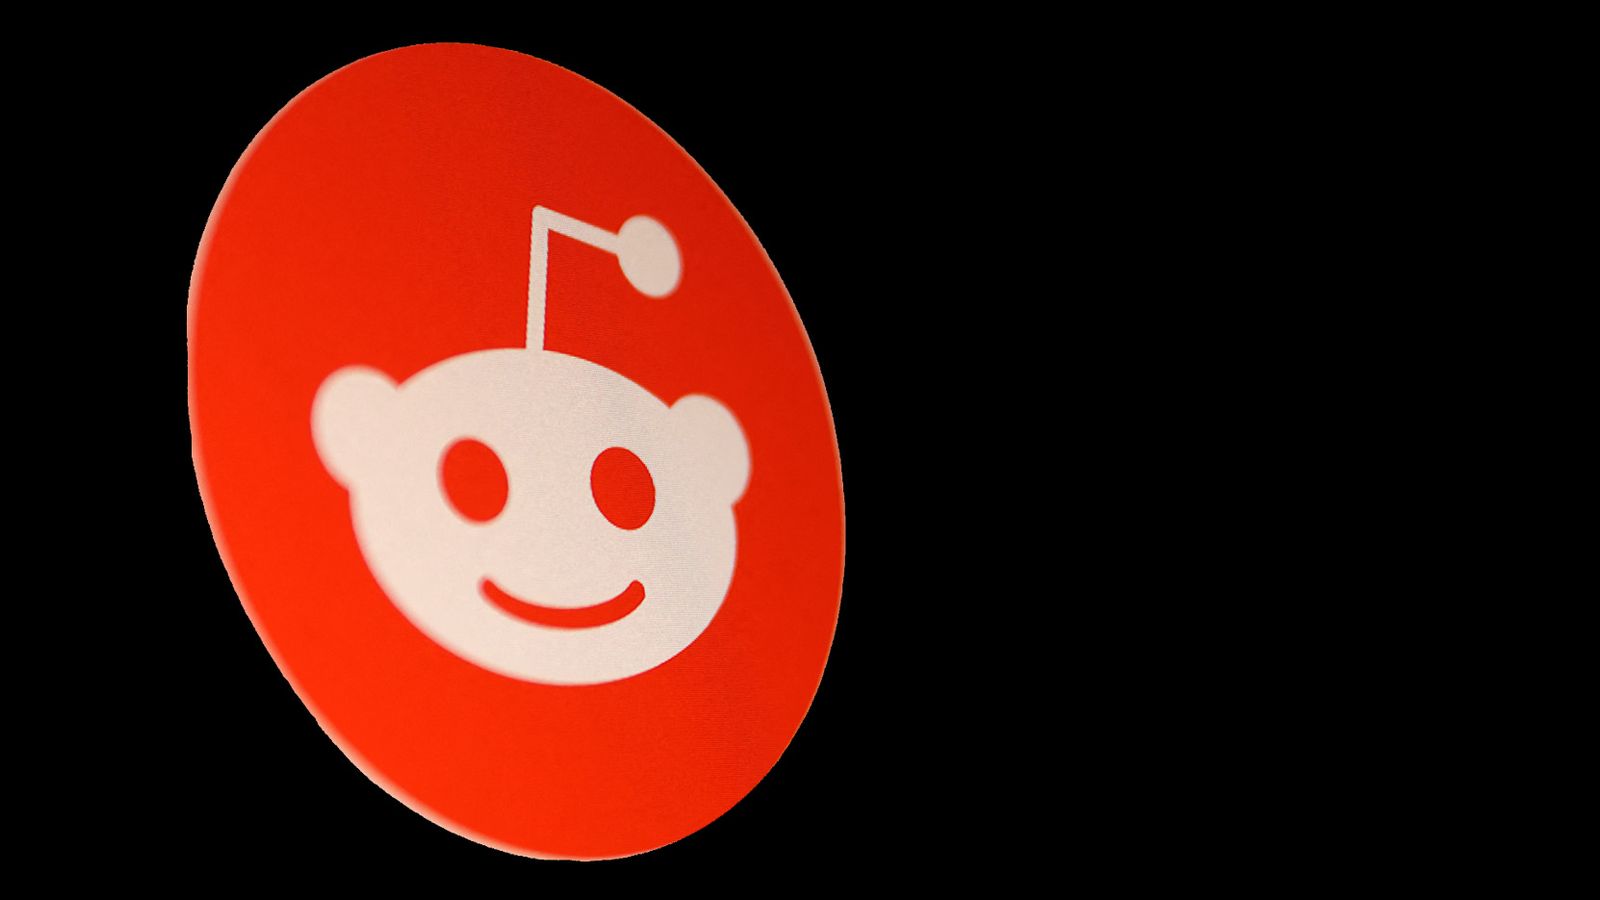 Reddit blackout: Thousands of communities have gone dark - here's